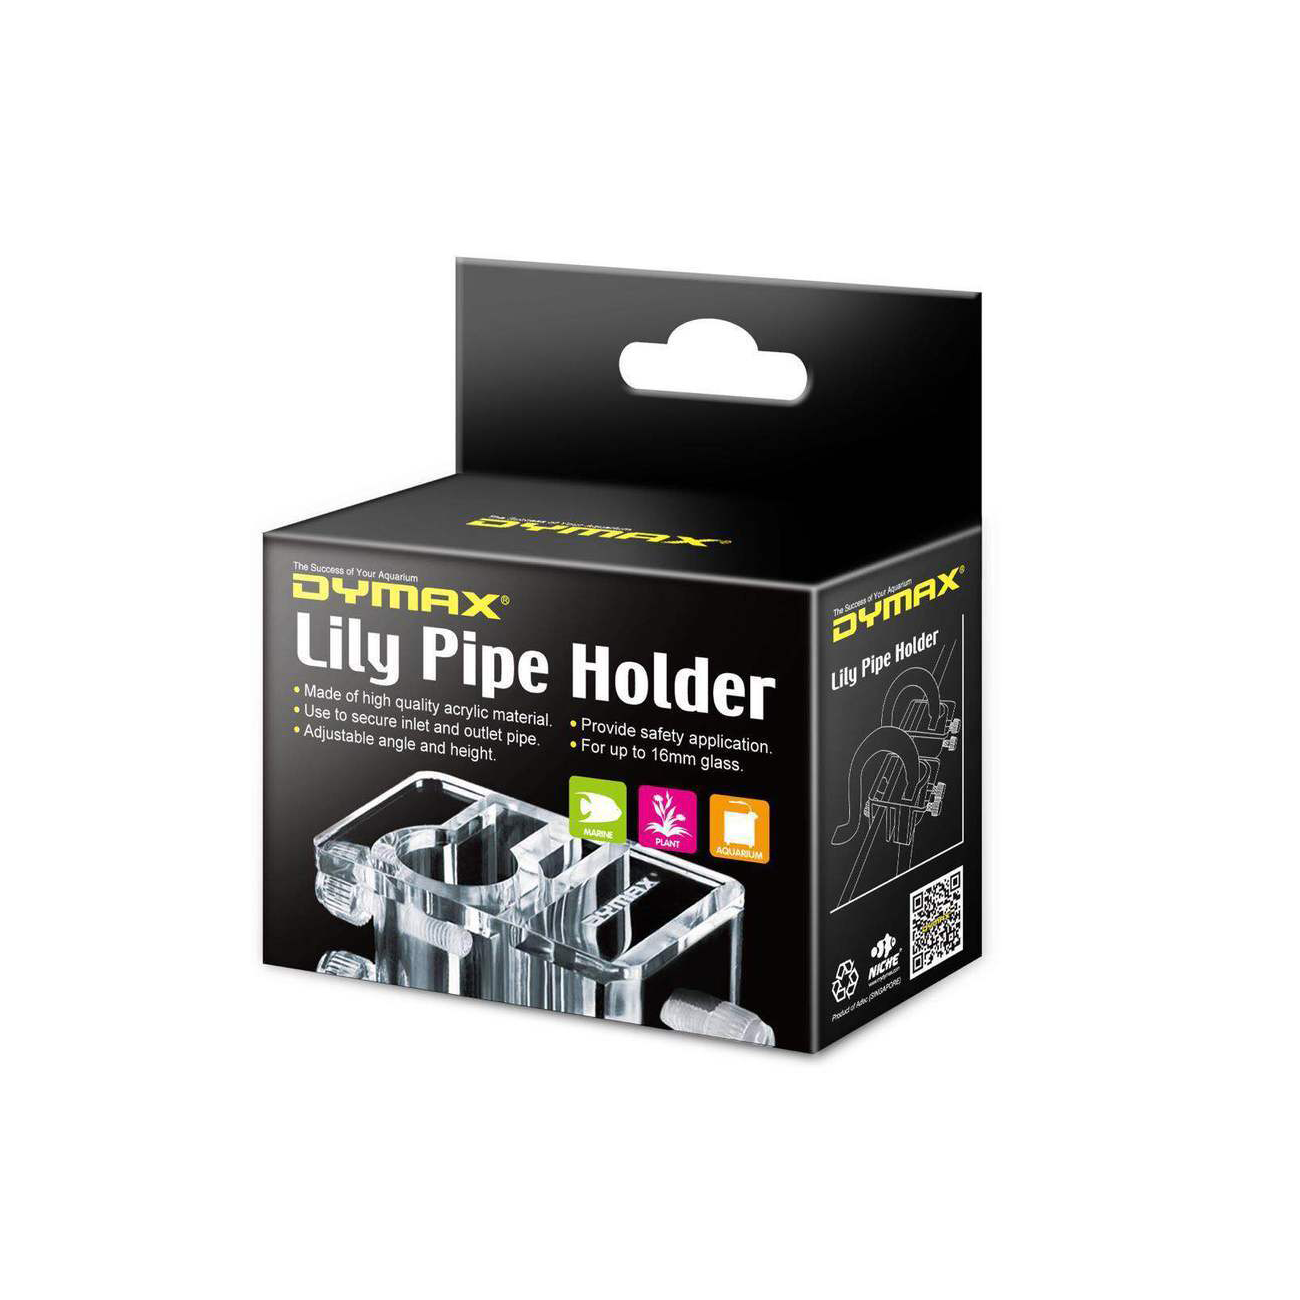 Dymax Lily Pipe Holder - 2pk